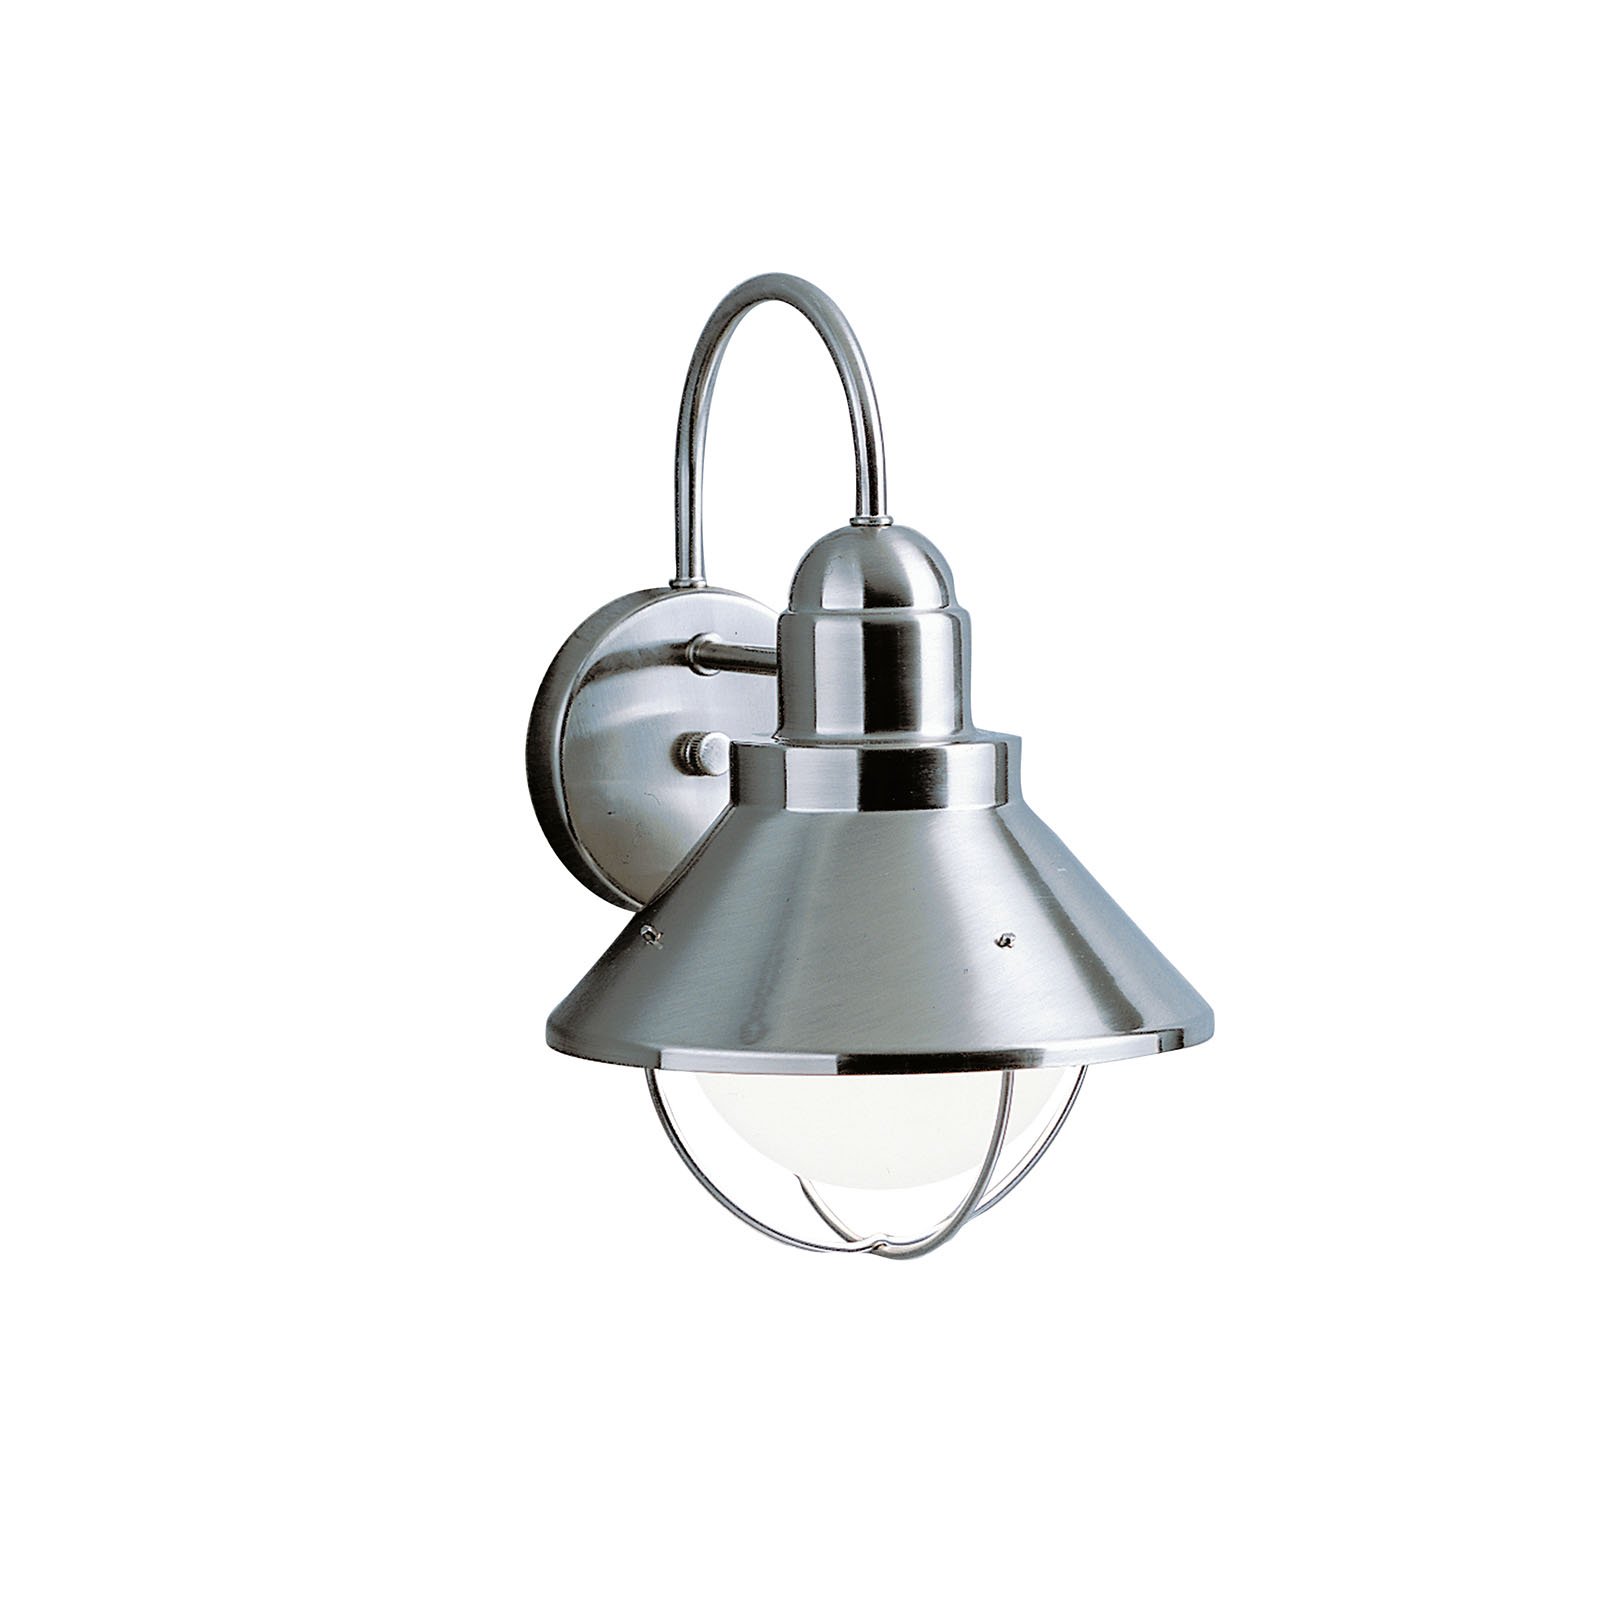 With an aura that is as pure as a sea breeze, the Seaside(TM)Collection offers the homeowner a unique line of outdoor fixtures guaranteed to bring a new identity to your home's landscape. For this 1-light Seaside(TM)Wall Lantern, solid brass is combined with Kichler's Brushed Nickel finish, resulting in a high quality fit that will look fantastic for years to come. The fixture houses a 100-watt (max.) bulb that provides outstanding outdoor illumination for your landscape. It is 12in. high, is U.L. listed for wet location, and is Dark Skies compliant.